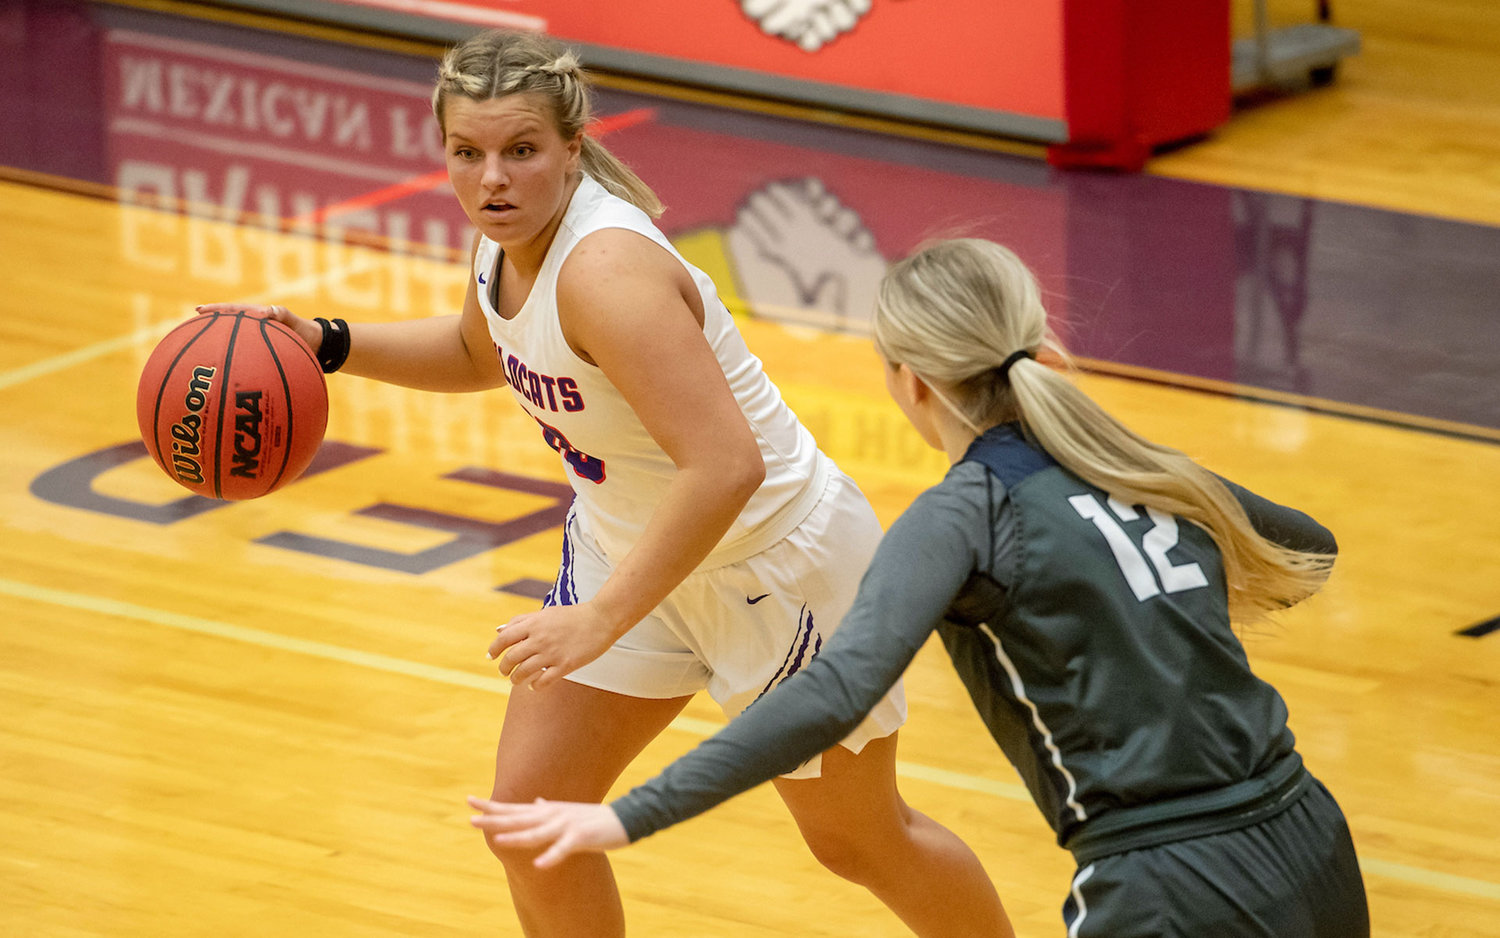 Shasta Lofgren, a 2017 W.F. West graduate, wrapped up her college basketball career with Linfield University on April 24.